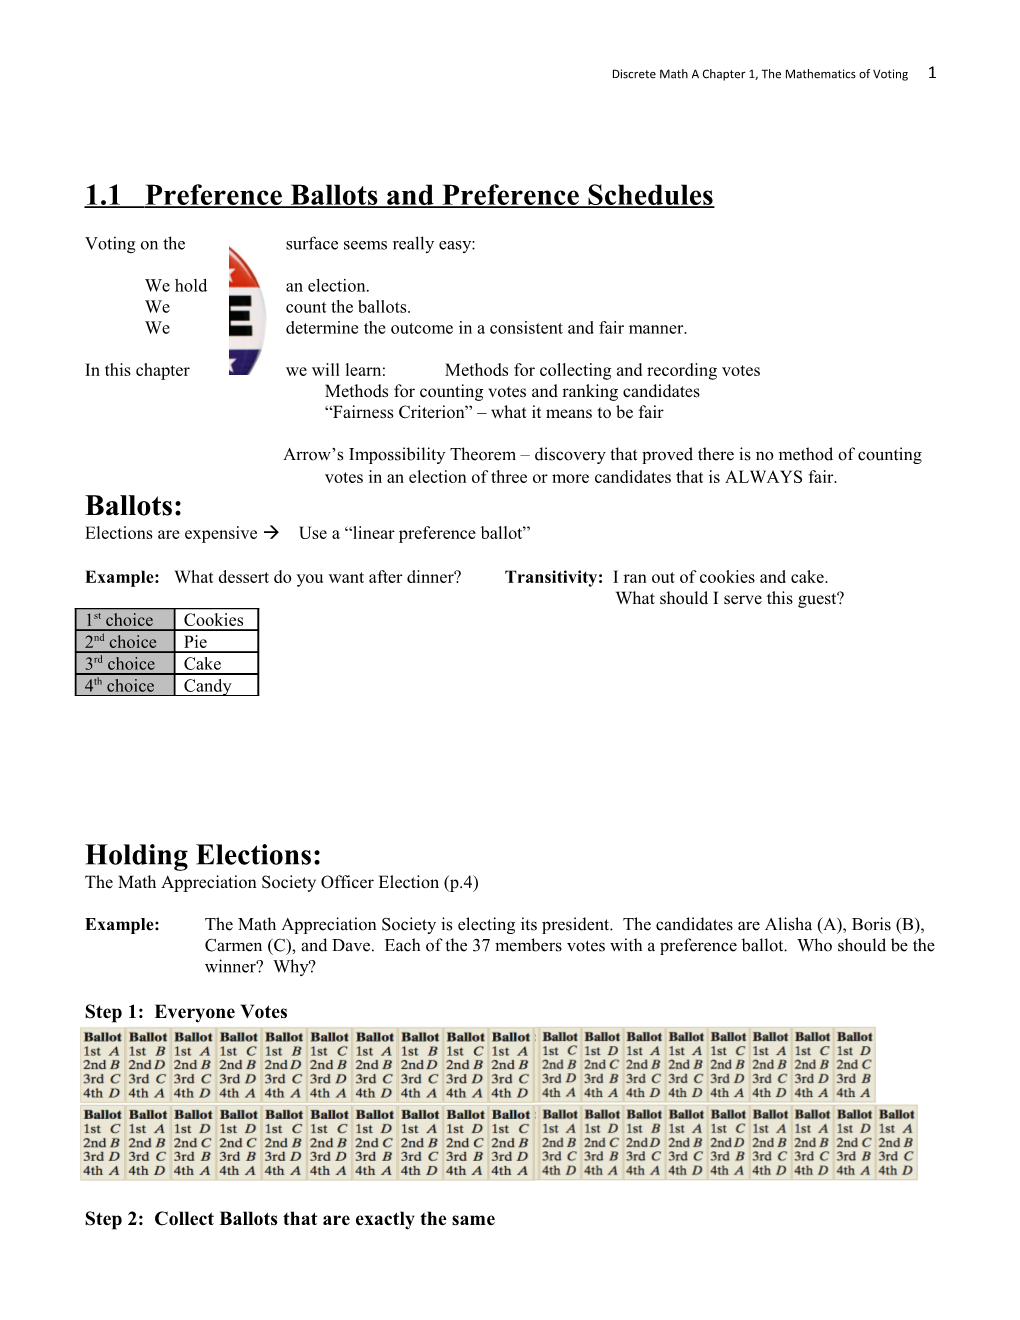 1.1Preference Ballots and Preference Schedules